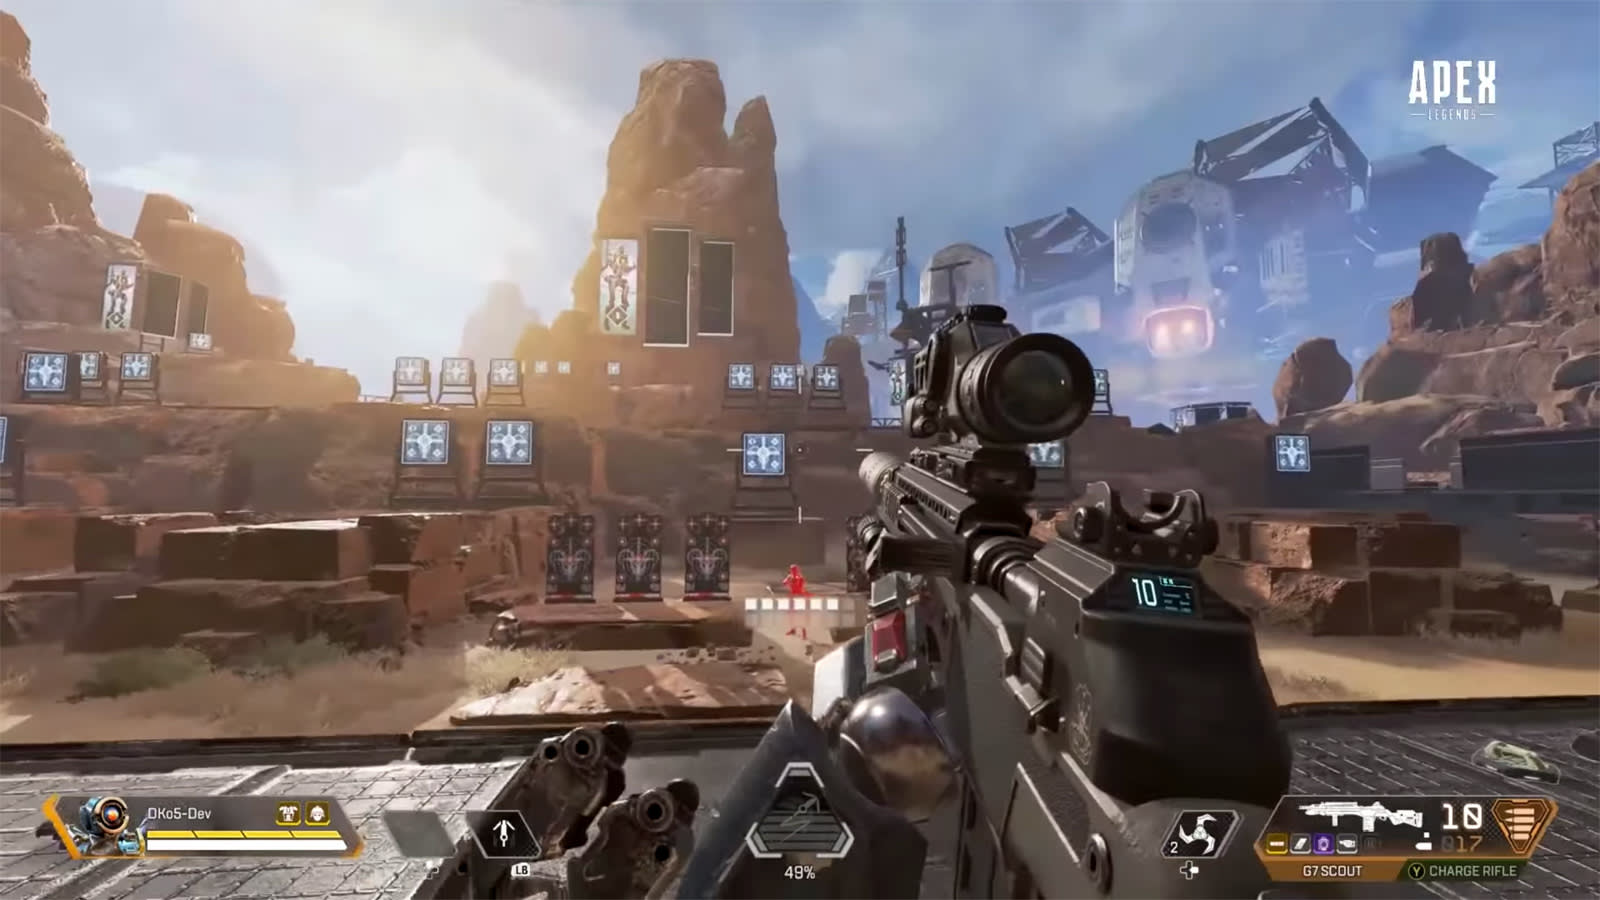 Improved 'Apex Legends' training zone better prepares you for combat | Engadget